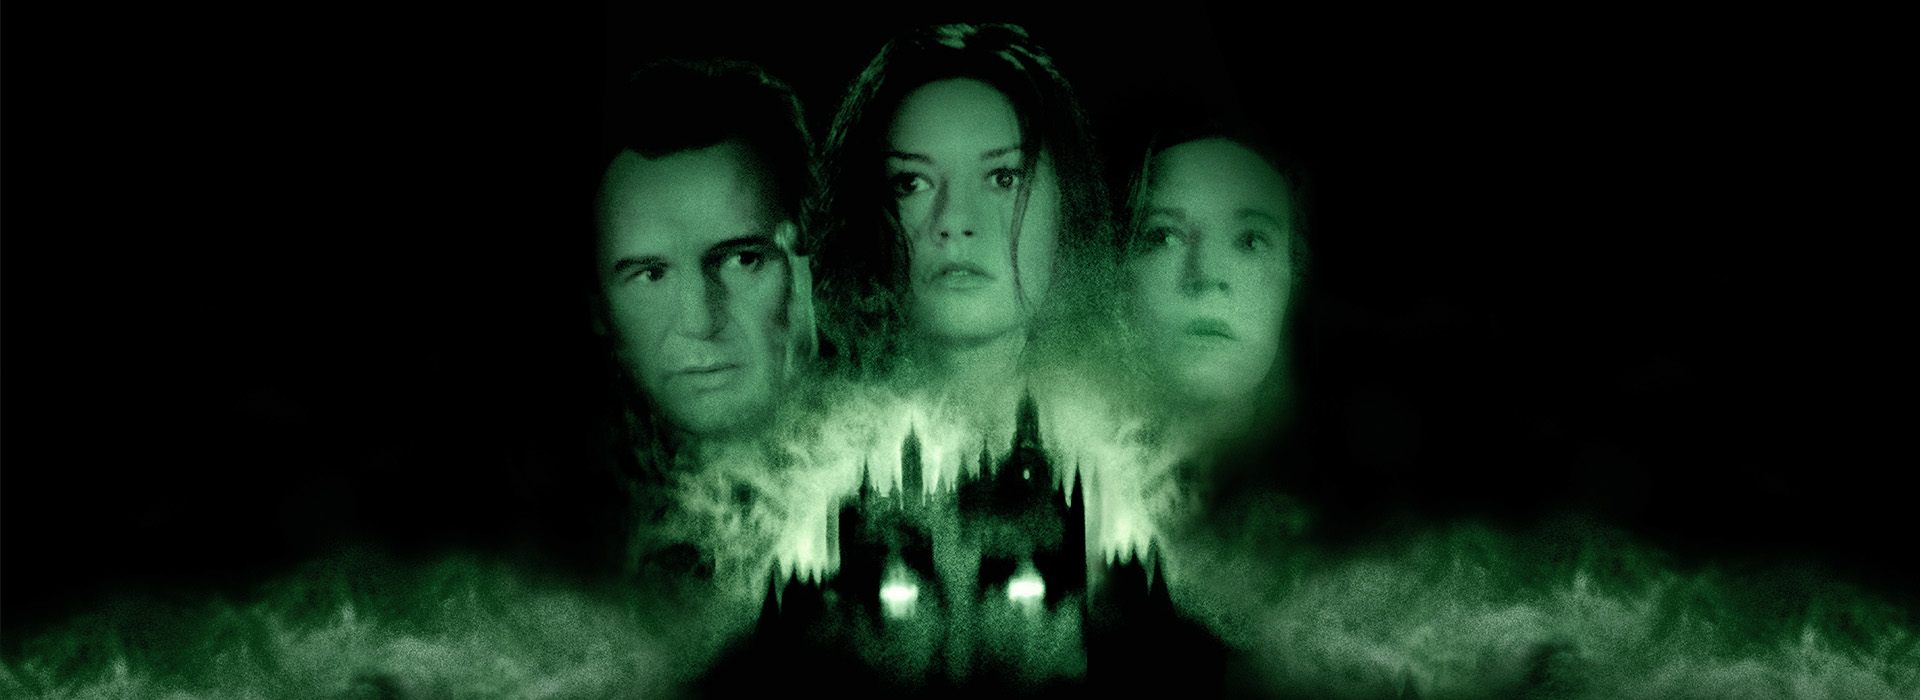 Movie poster The Haunting